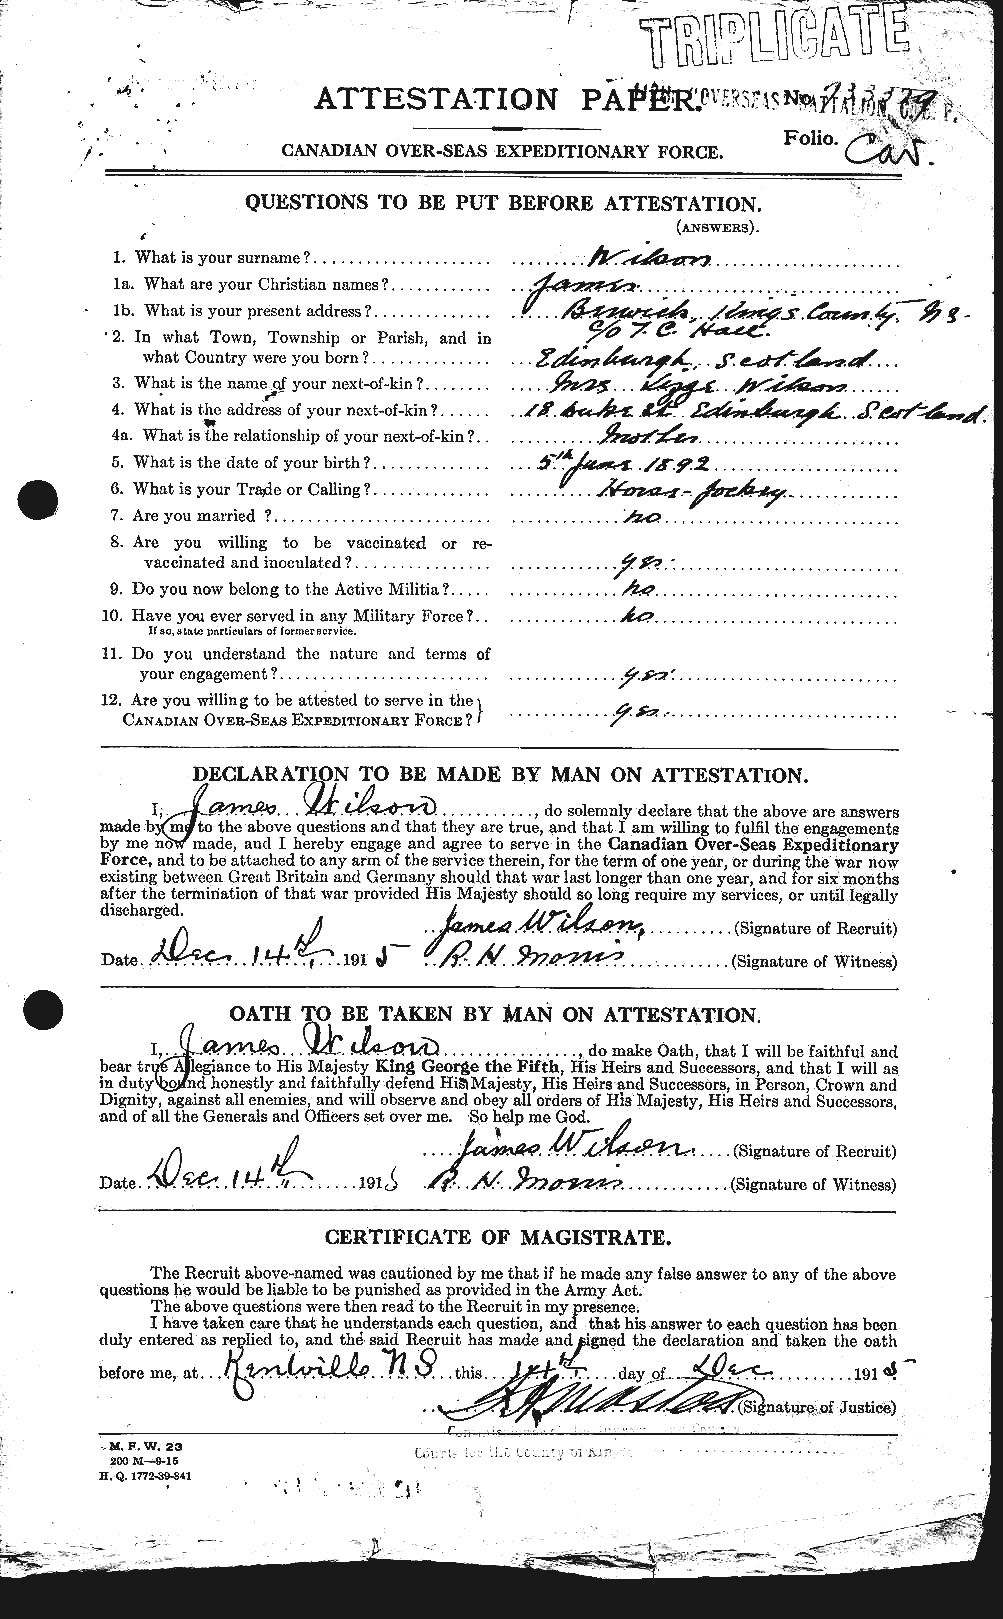 Personnel Records of the First World War - CEF 681368a